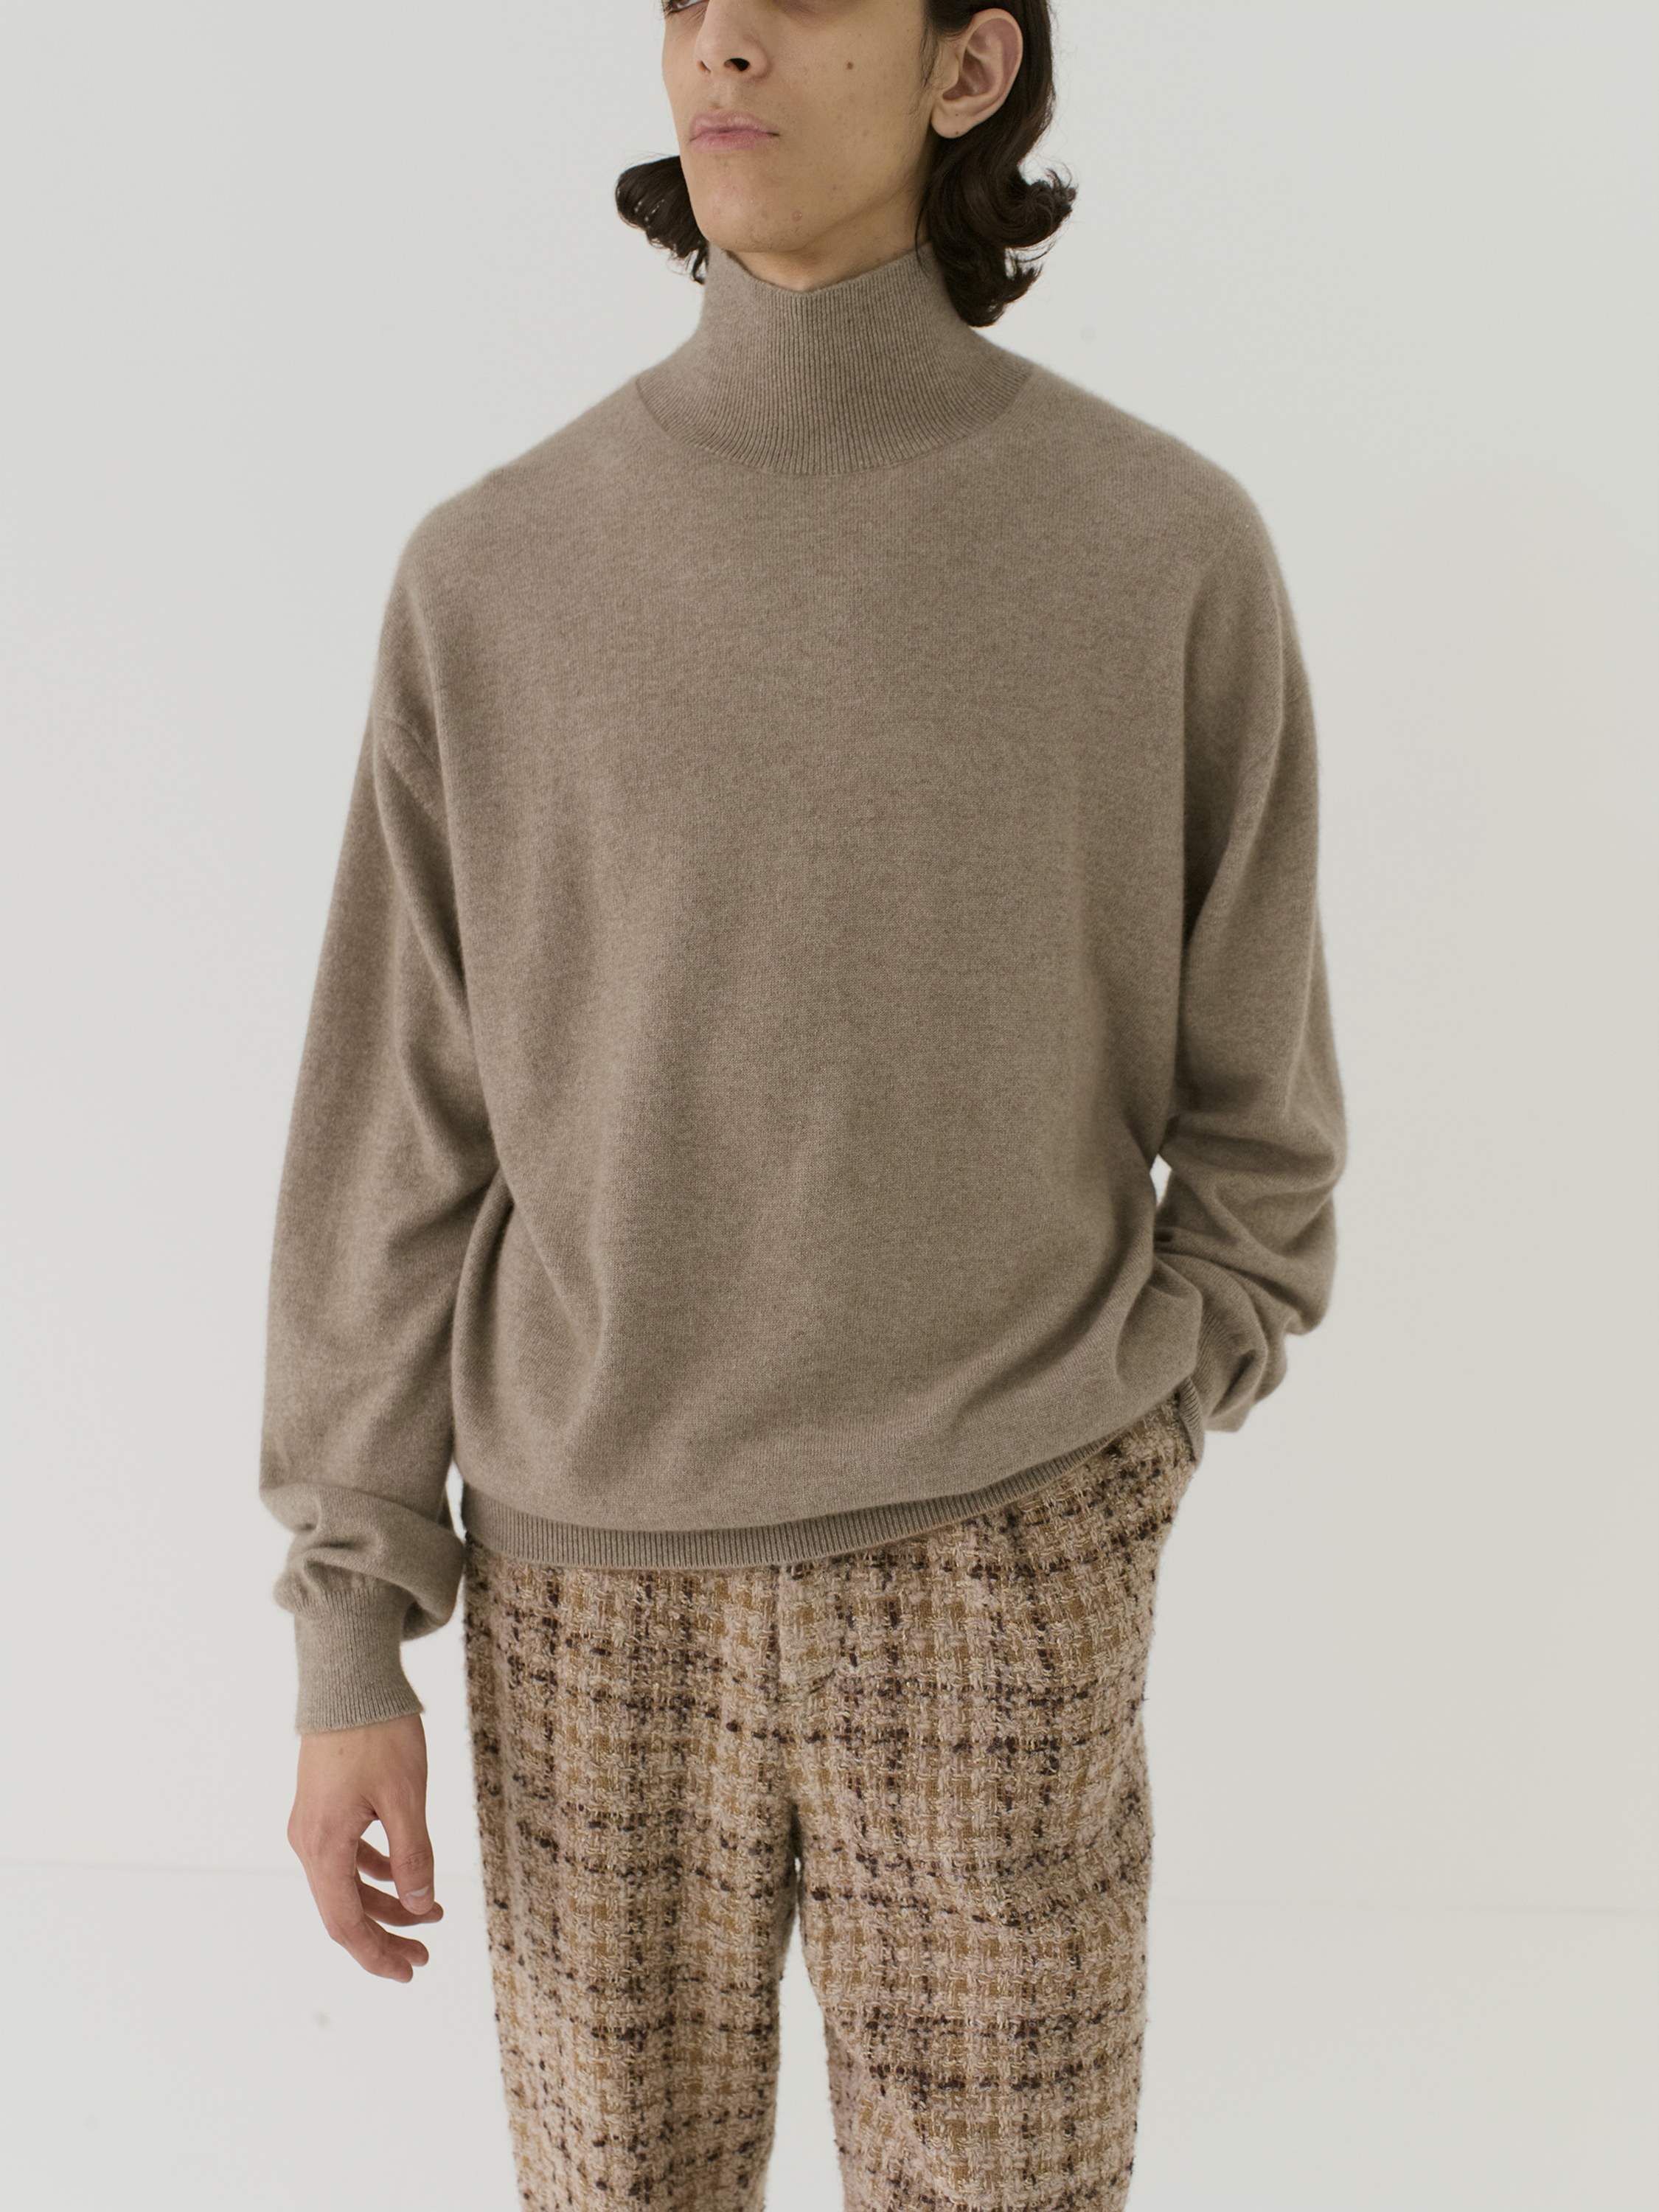 BABY CASHMERE KNIT TURTLE 詳細画像 NATURAL BROWN 1